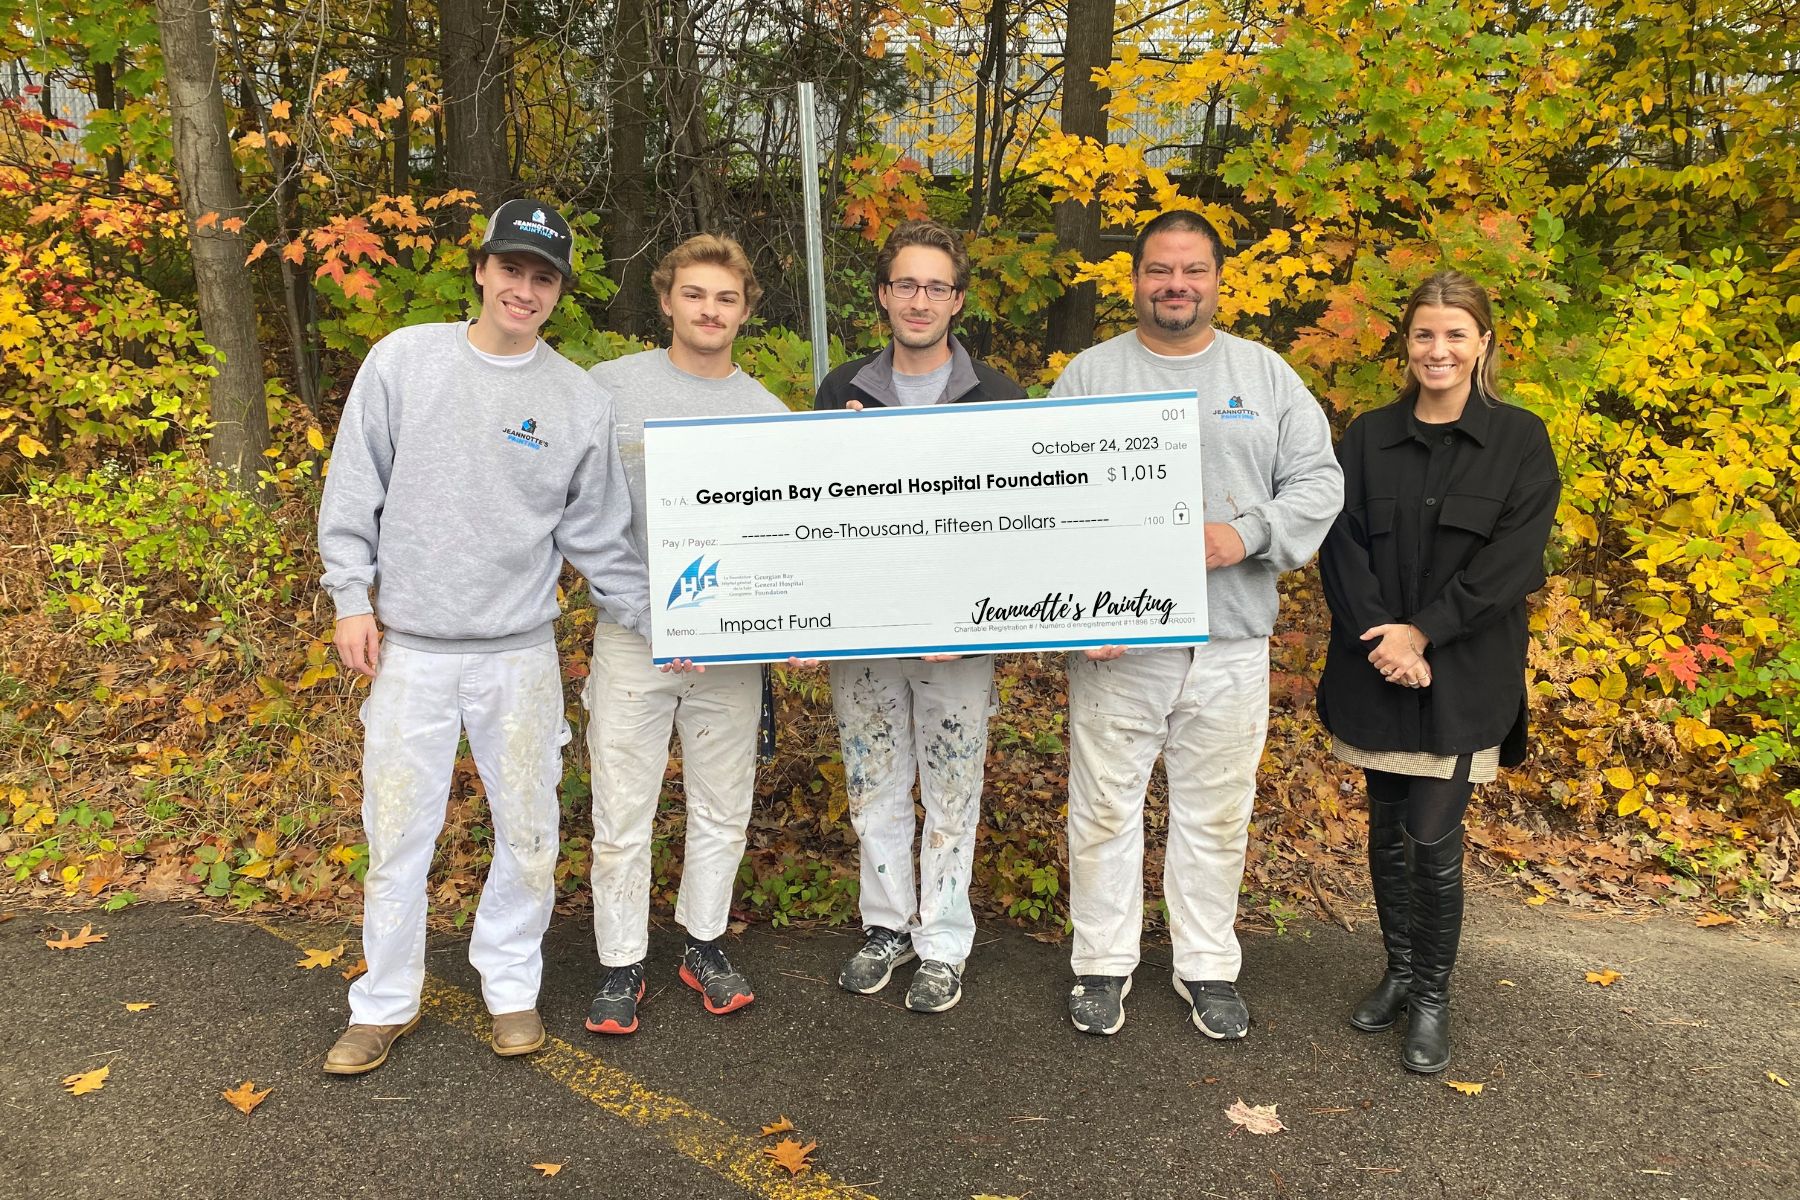 Four men in grey and white paint stained clothing hold a giant cheque made out to GBGH Foundation for $1, 015 from Jeannotte's Painting. A women wearing black stands beside them.